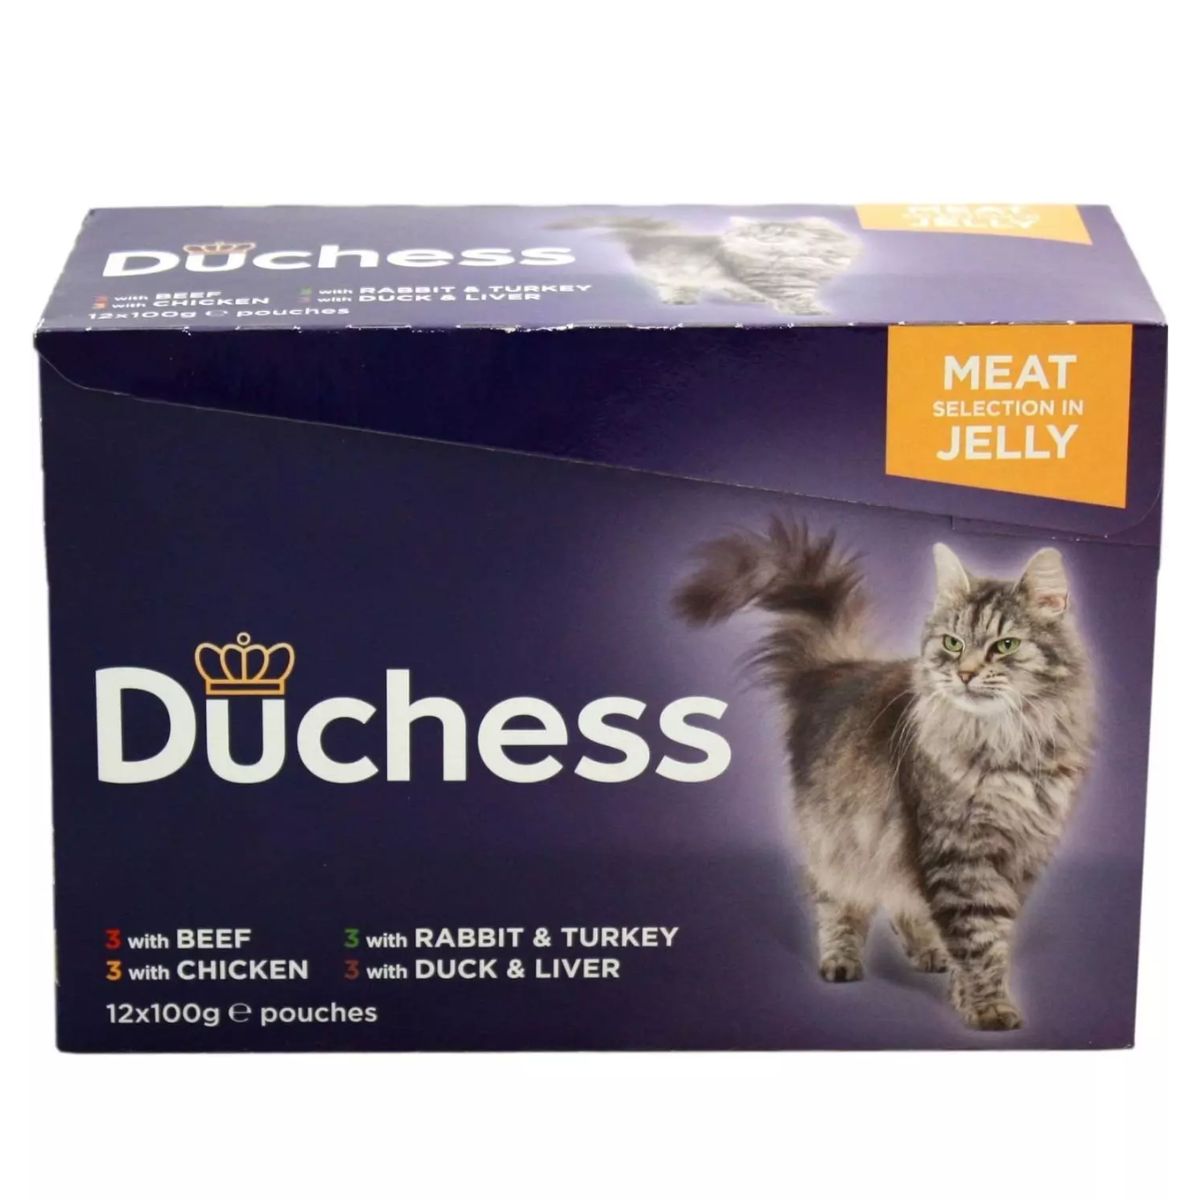 A box of Duchess - Pouches Meat Jelly - 12x100g cat food.